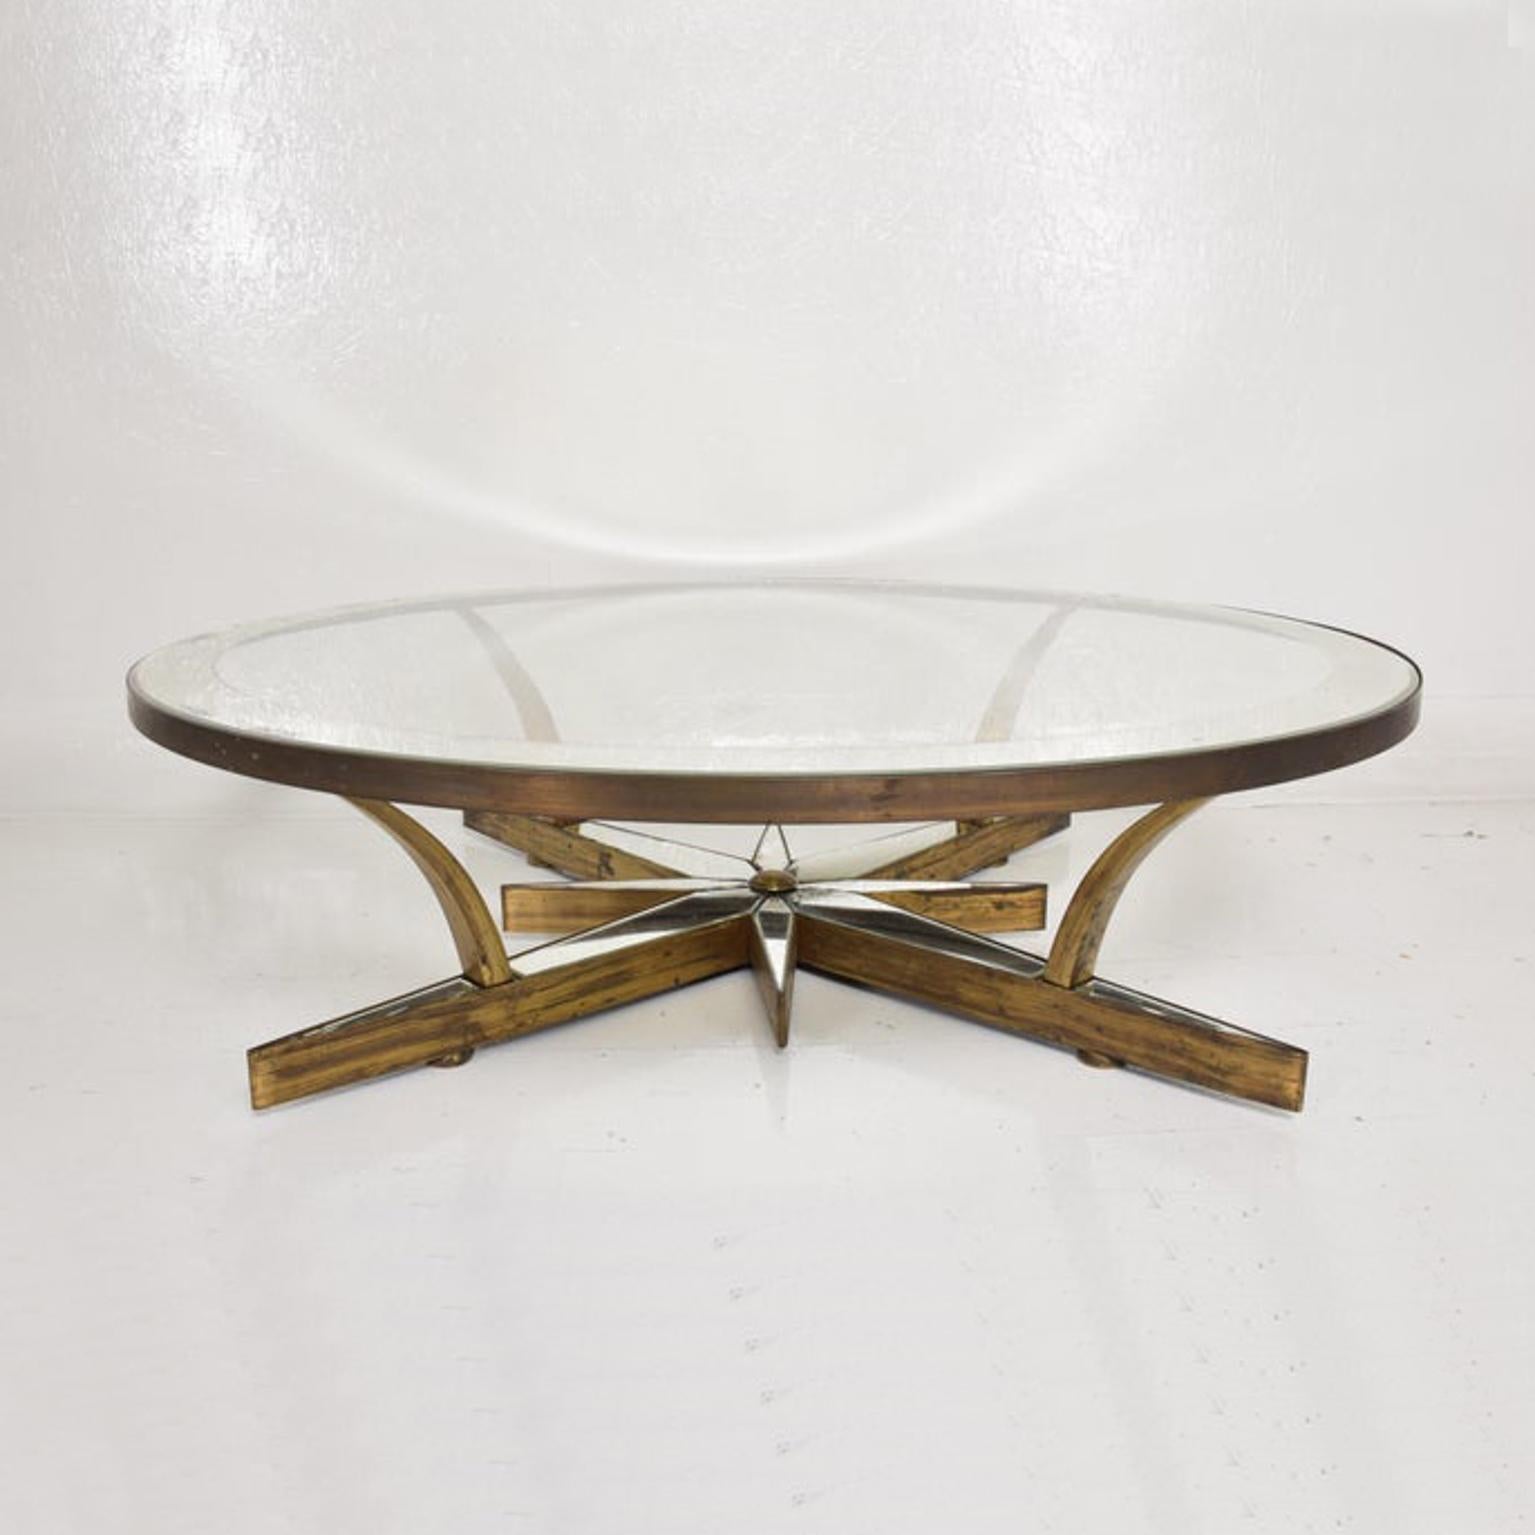 Mid-Century Modern Arturo Pani Center STAR Glass Cocktail Coffee Table in Brass Modern 1950s Mexico